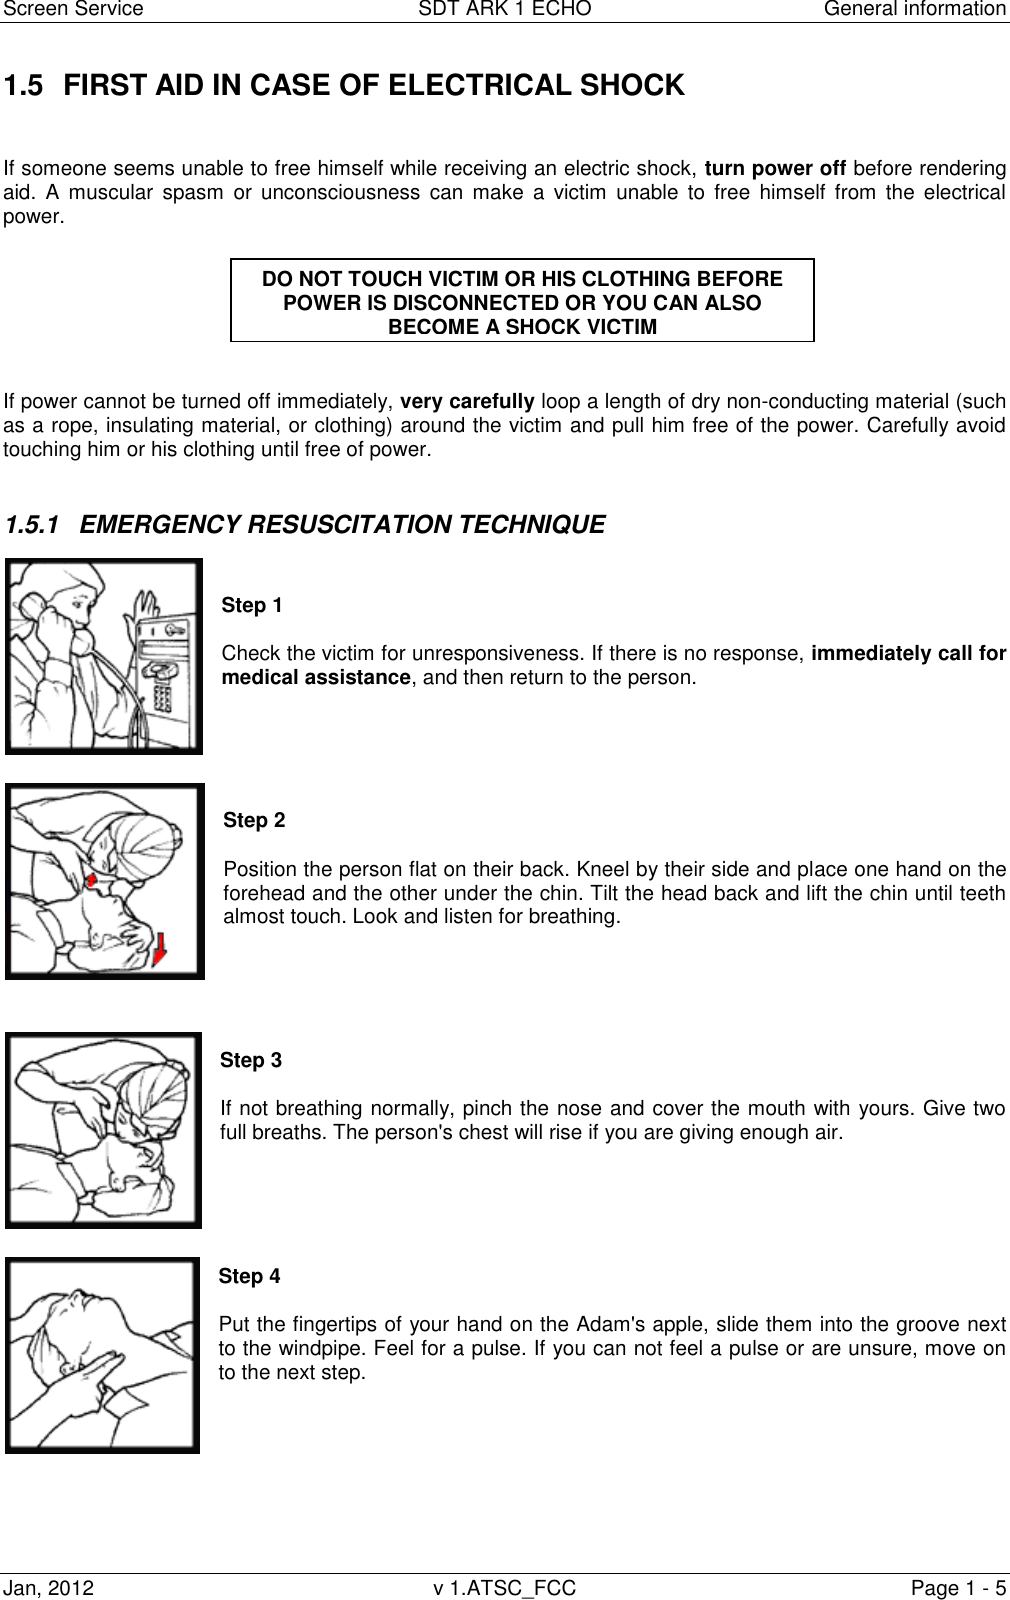 Screen Service  SDT ARK 1 ECHO  General information Jan, 2012  v 1.ATSC_FCC  Page 1 - 5 1.5  FIRST AID IN CASE OF ELECTRICAL SHOCK   If someone seems unable to free himself while receiving an electric shock, turn power off before rendering aid.  A  muscular  spasm  or  unconsciousness  can  make  a  victim  unable  to  free  himself  from  the  electrical power.    If power cannot be turned off immediately, very carefully loop a length of dry non-conducting material (such as a rope, insulating material, or clothing) around the victim and pull him free of the power. Carefully avoid touching him or his clothing until free of power.  1.5.1  EMERGENCY RESUSCITATION TECHNIQUE   Step 1  Check the victim for unresponsiveness. If there is no response, immediately call for medical assistance, and then return to the person.      Step 2   Position the person flat on their back. Kneel by their side and place one hand on the forehead and the other under the chin. Tilt the head back and lift the chin until teeth almost touch. Look and listen for breathing.      Step 3  If not breathing normally, pinch the nose and cover the mouth with yours. Give two full breaths. The person&apos;s chest will rise if you are giving enough air.      Step 4  Put the fingertips of your hand on the Adam&apos;s apple, slide them into the groove next to the windpipe. Feel for a pulse. If you can not feel a pulse or are unsure, move on to the next step.        DO NOT TOUCH VICTIM OR HIS CLOTHING BEFORE POWER IS DISCONNECTED OR YOU CAN ALSO BECOME A SHOCK VICTIM  